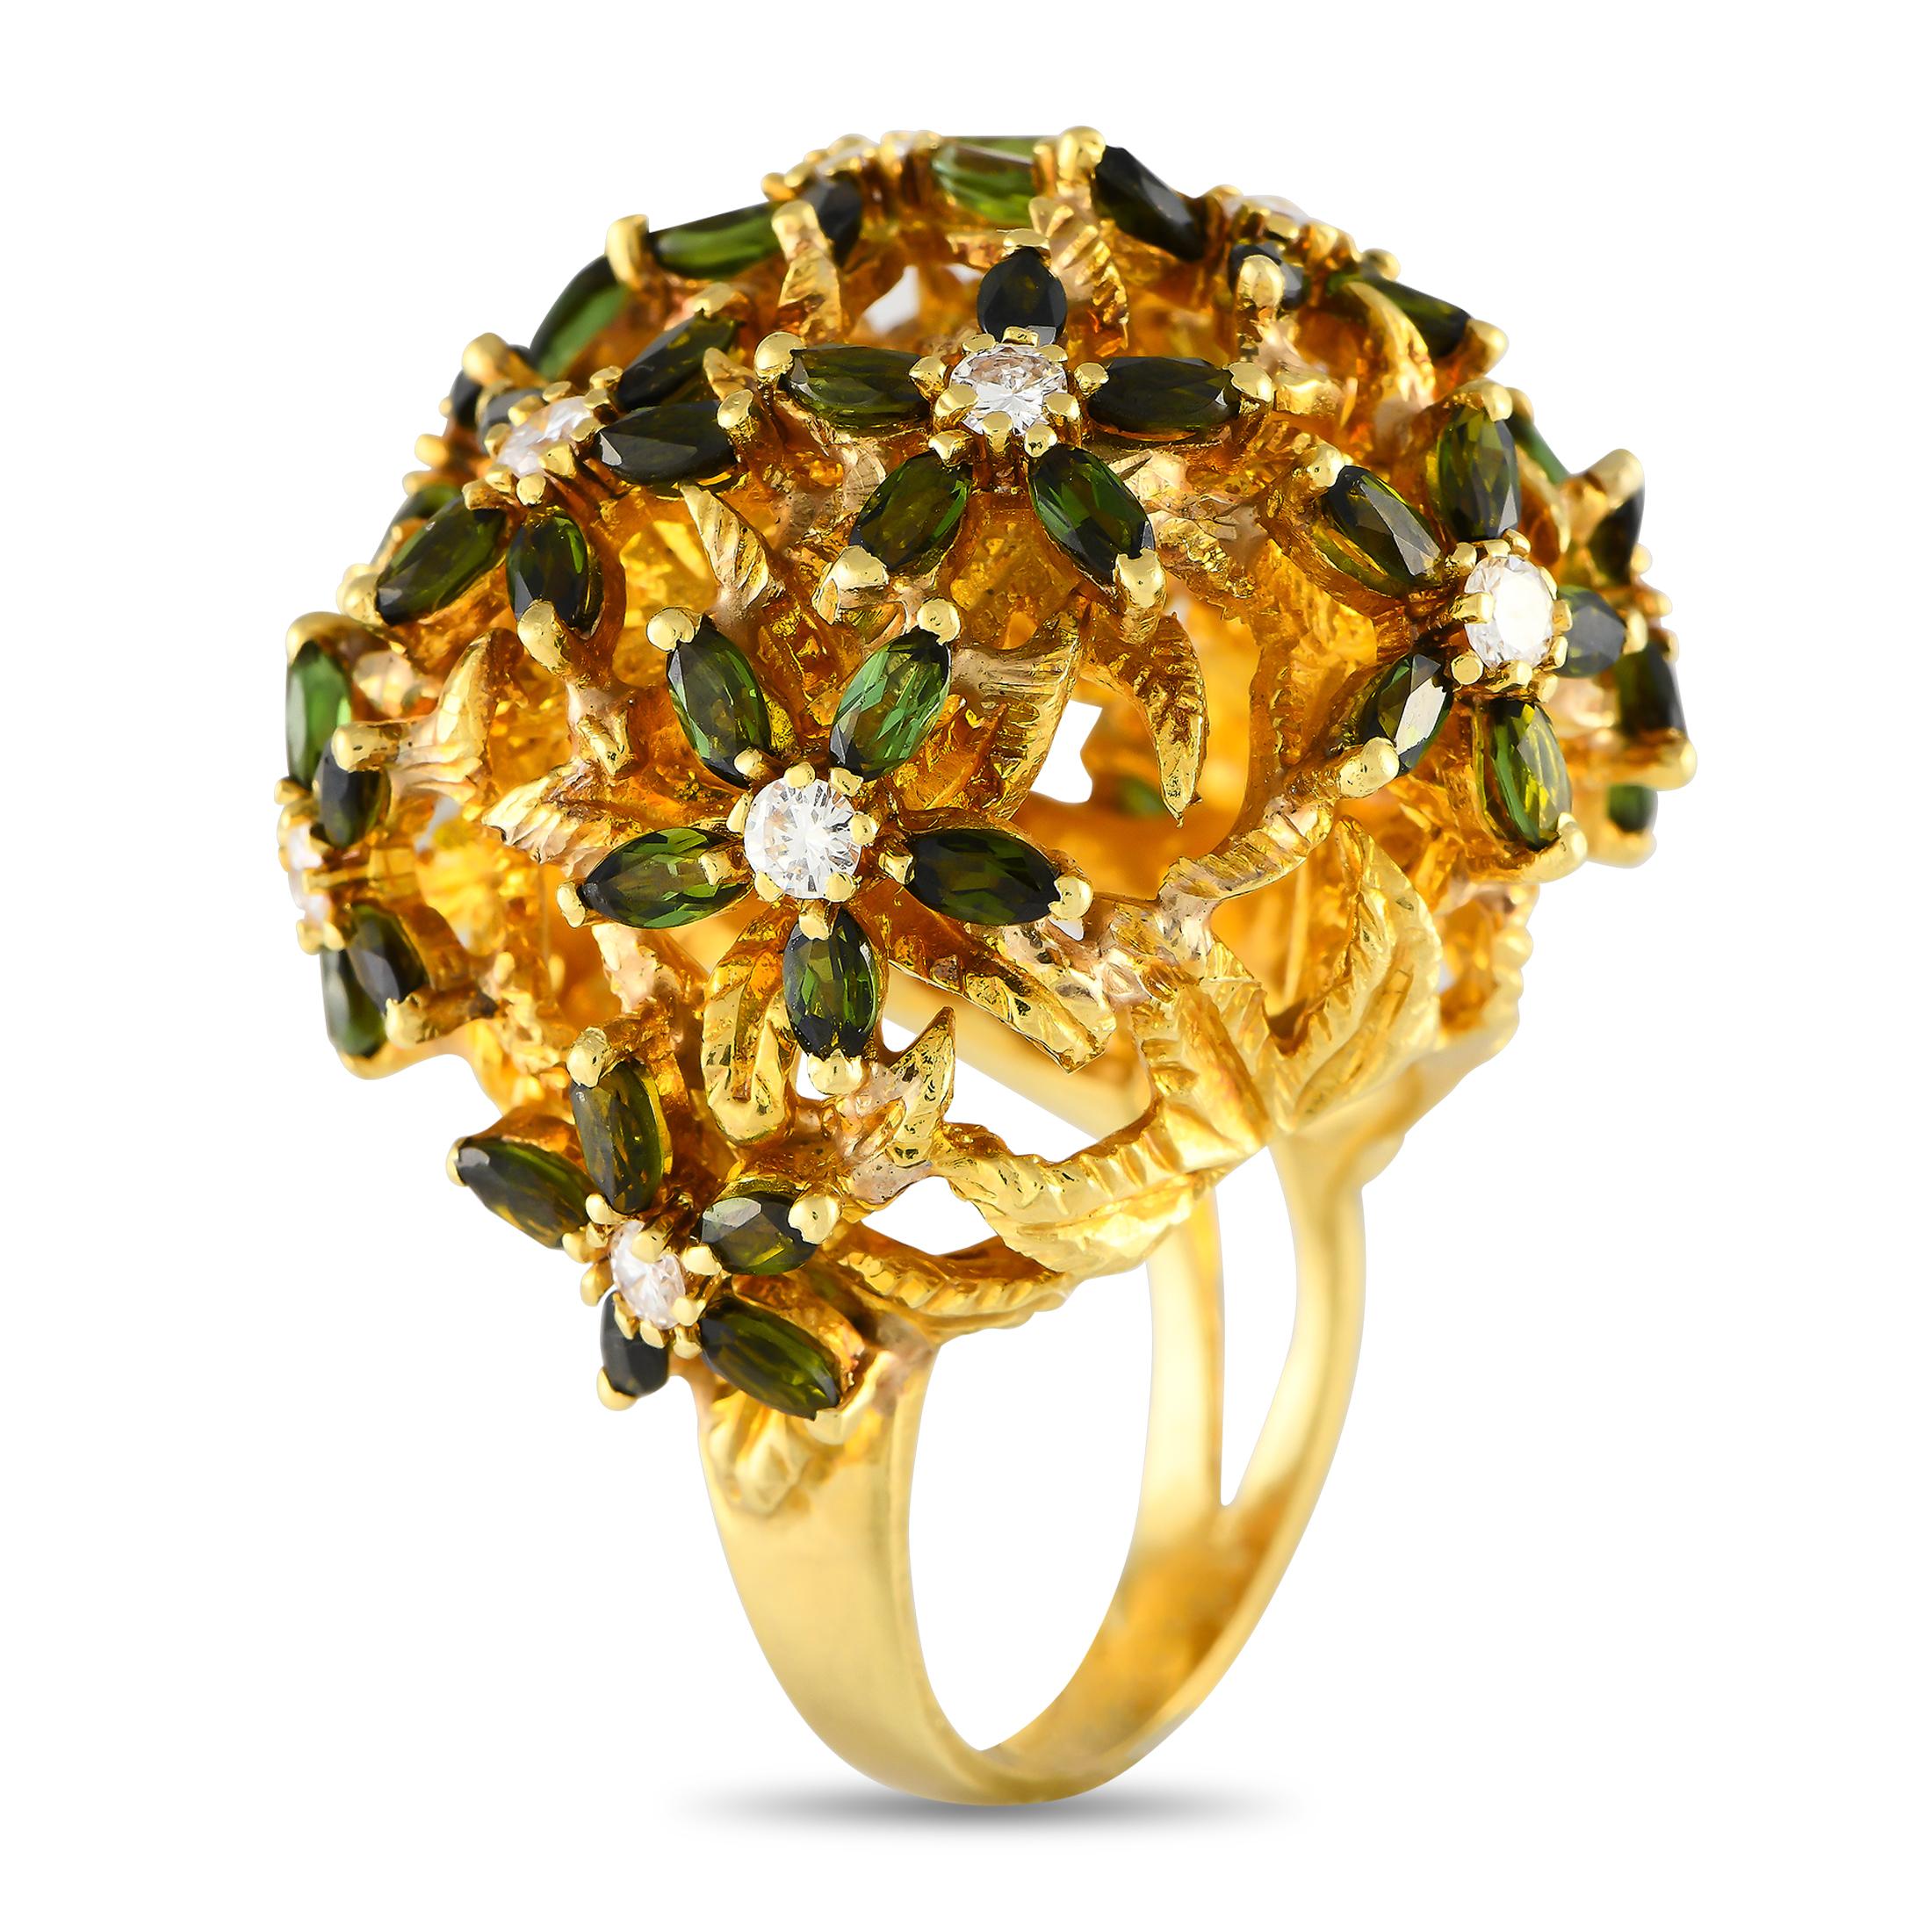 Get yourself a bouquet that will never wither or fade. This bouquet-inspired statement ring is designed with ageless beauty and timeless elegance. It features an 18K yellow-gold band with a sculpted top that forms a rounded bouquet of gemstone